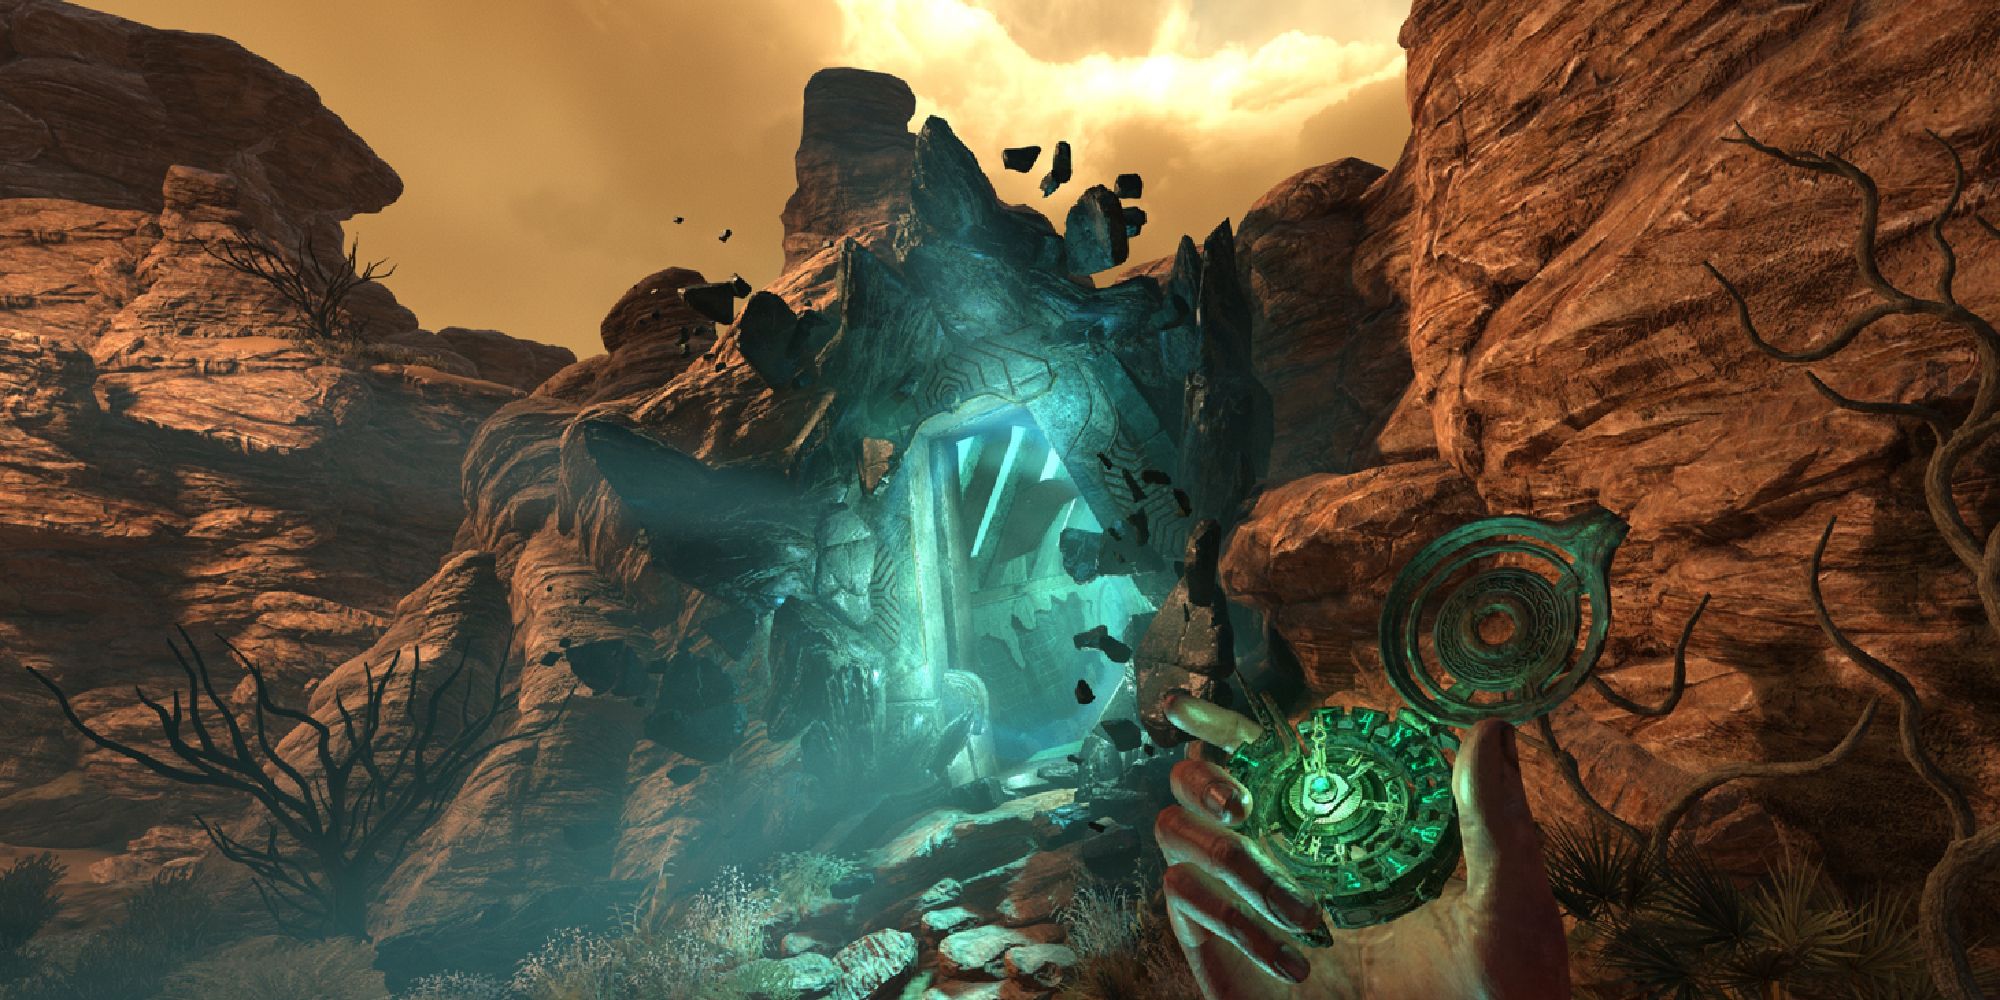 First person perspective of a rocky mountain path, leading to an entrance flowing with blue/green light, the main character holding some sort of compass. 